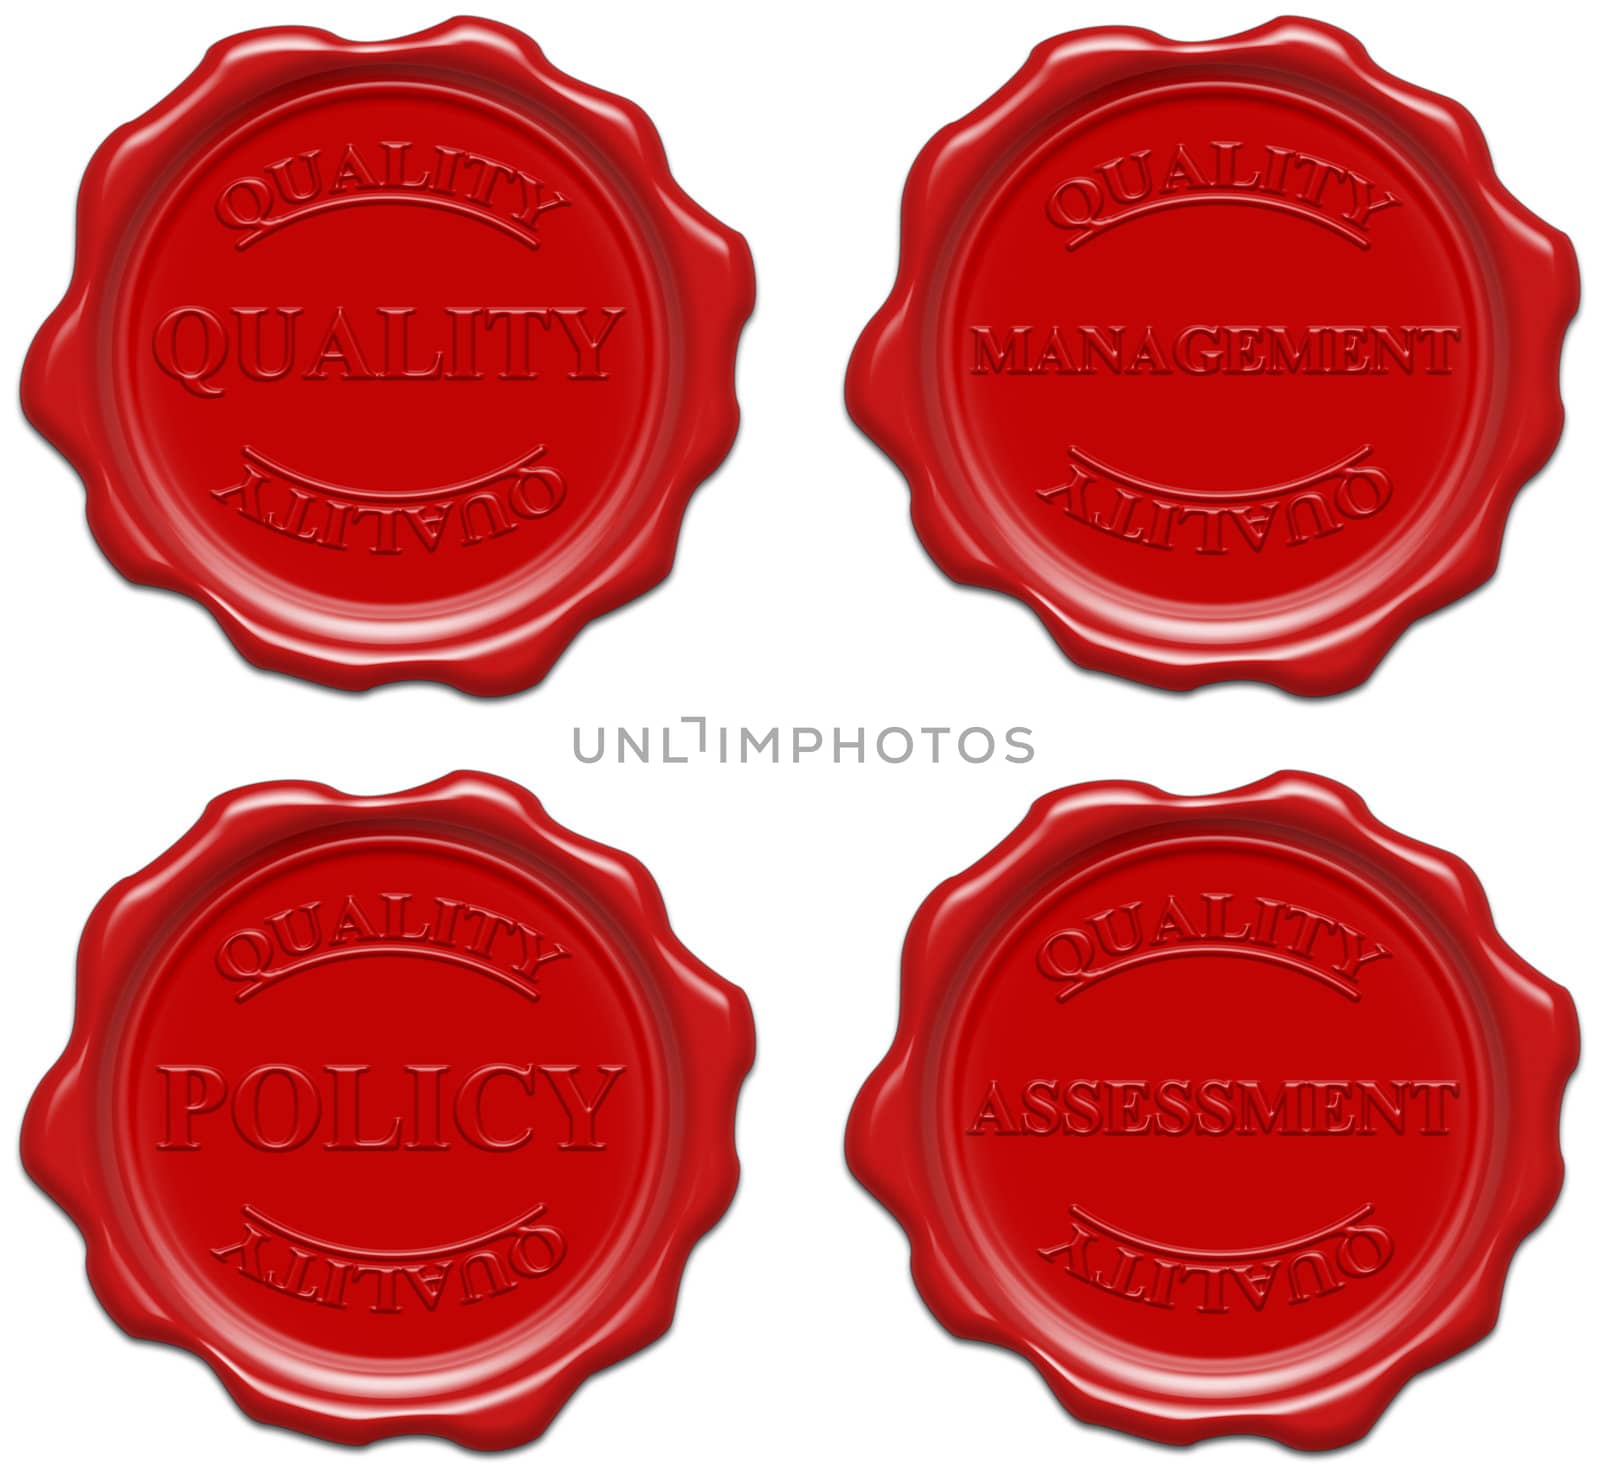 High resolution realistic red wax seal with text : quality, management, policy, assessment